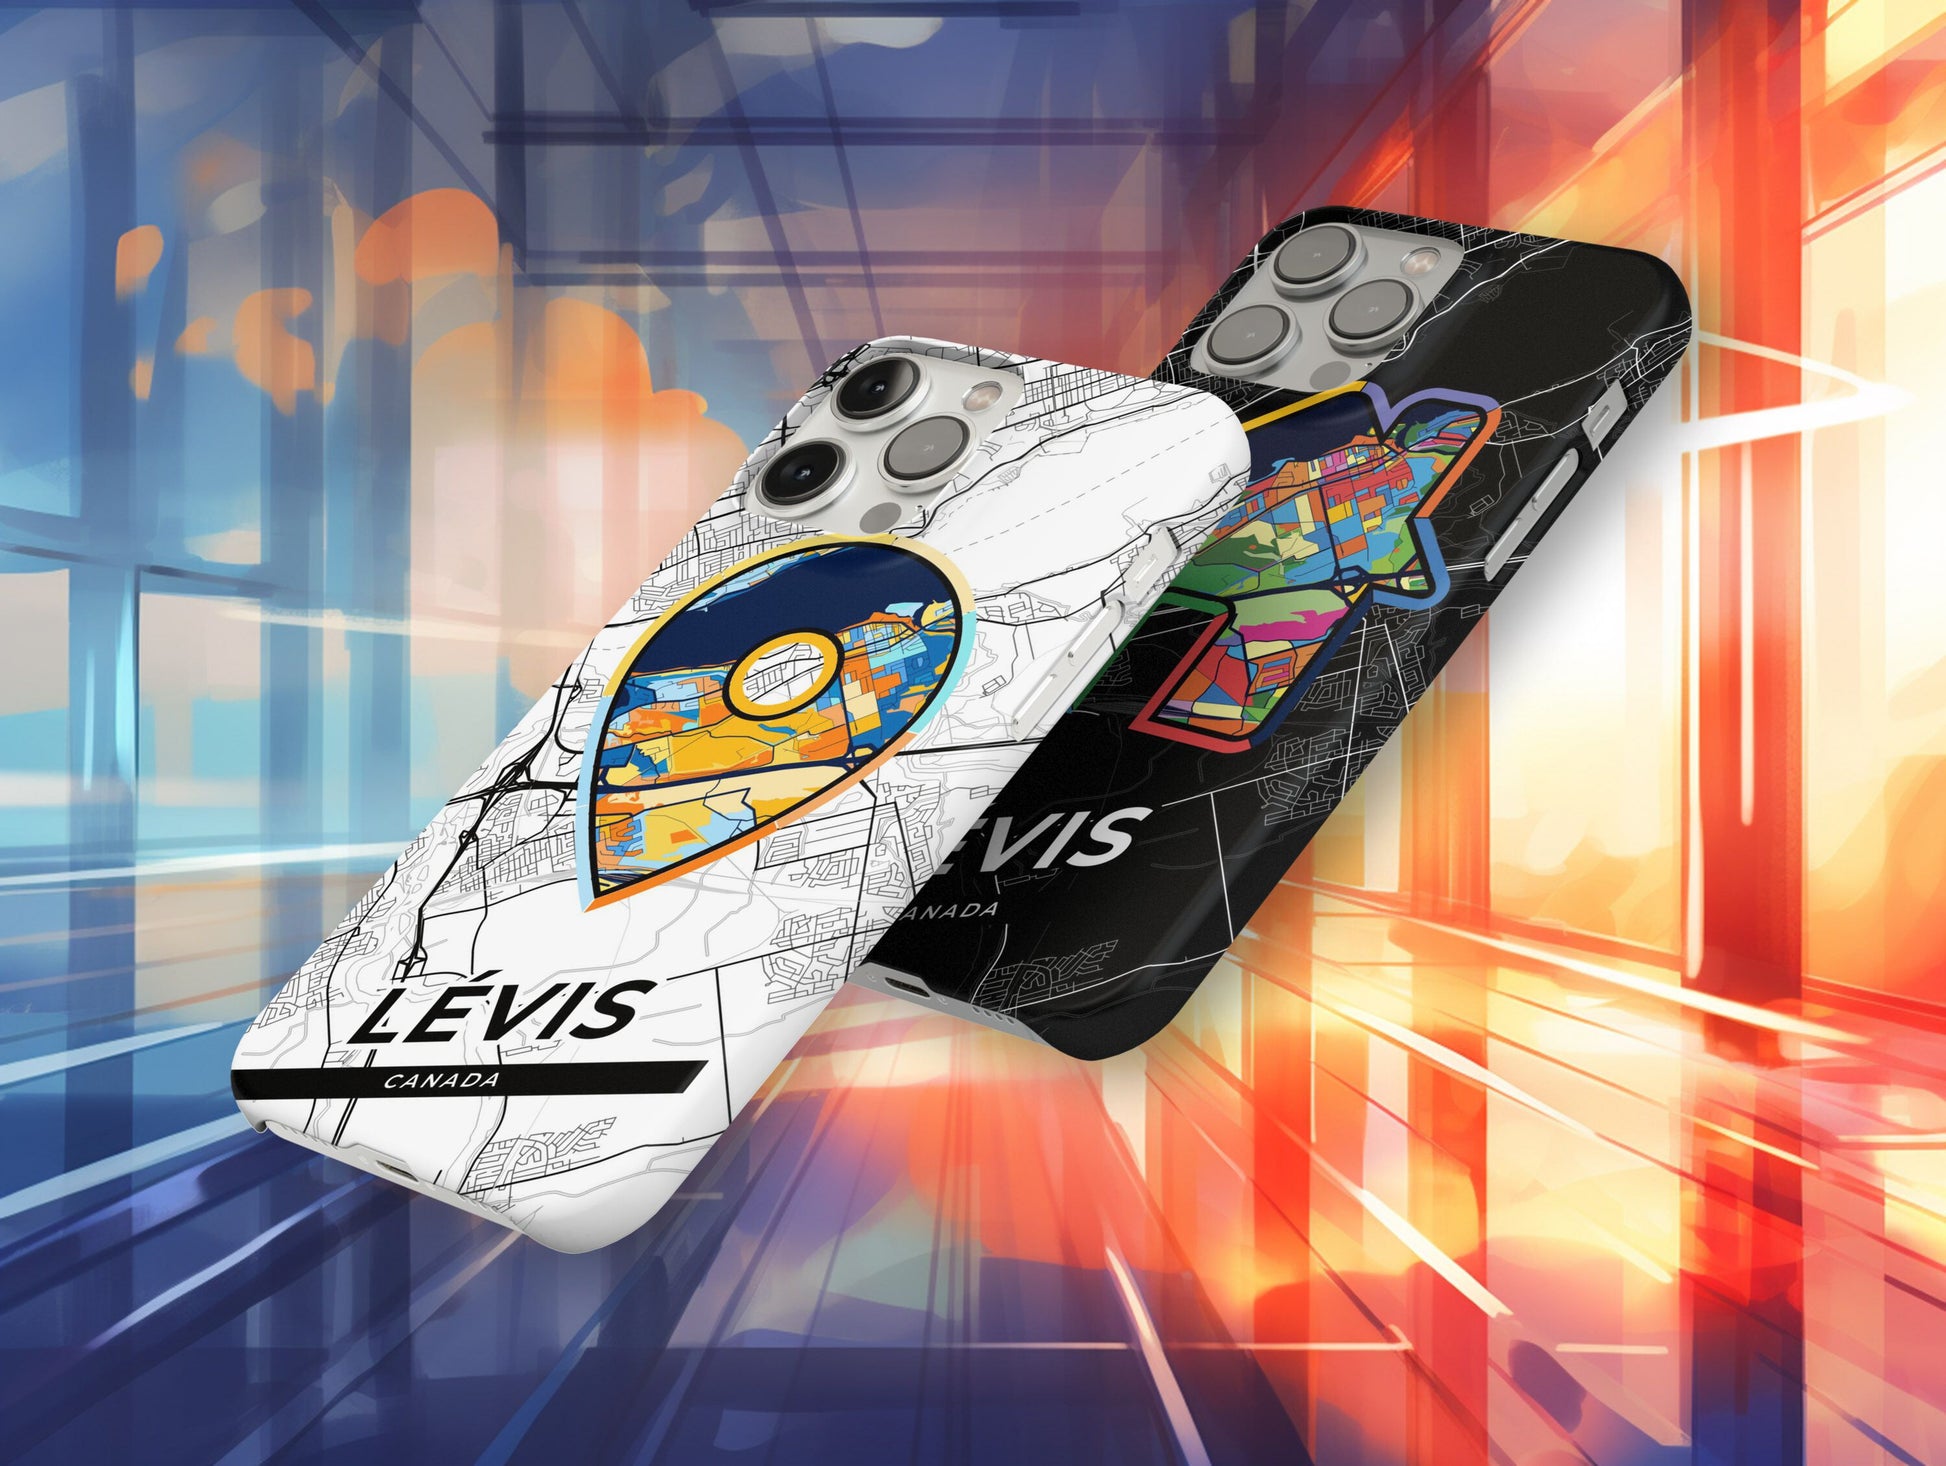 Lévis Canada slim phone case with colorful icon. Birthday, wedding or housewarming gift. Couple match cases.